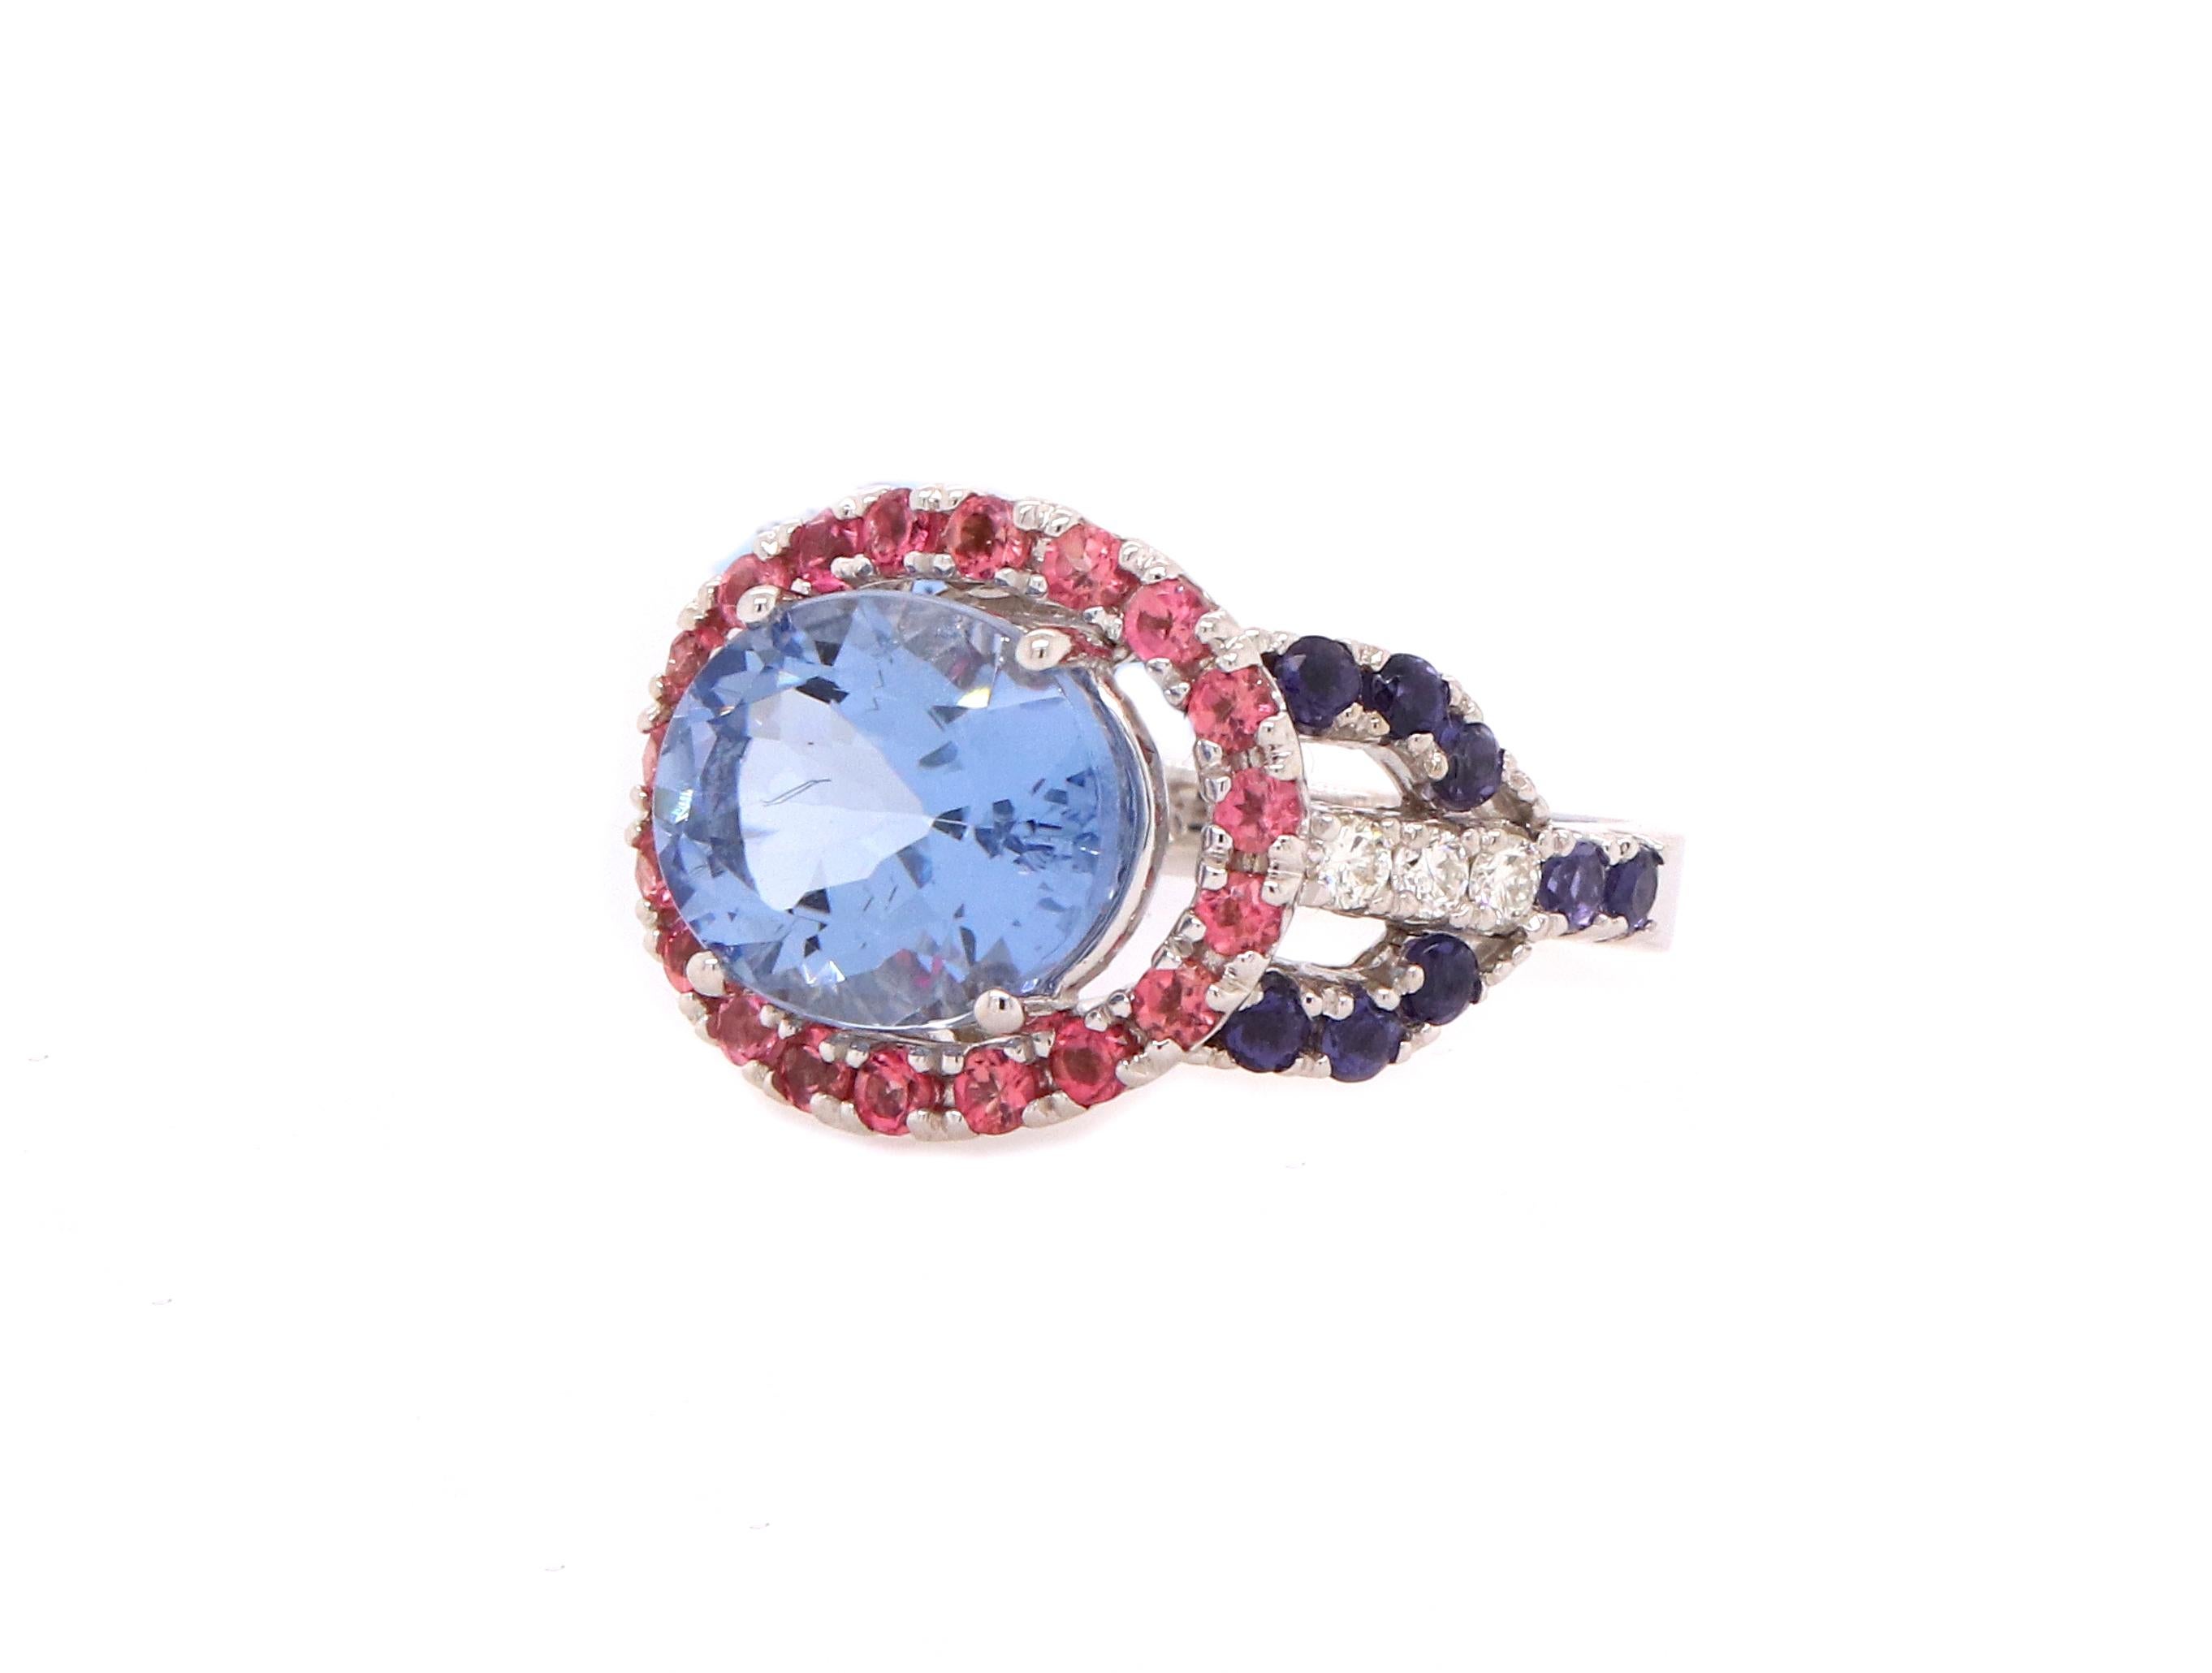 Material: 14k White Gold 
Center Stone Detail:  1 Oval Blue Beryl at 3.52 Carats - Measuring 9 x 11 mm
Mounting Stone Details:  19 Round Pink Tourmalines at 0.59 Carats
Mounting Stone Details:  16 Round Iolites at 0.56 Carats
Diamond Details: 6 